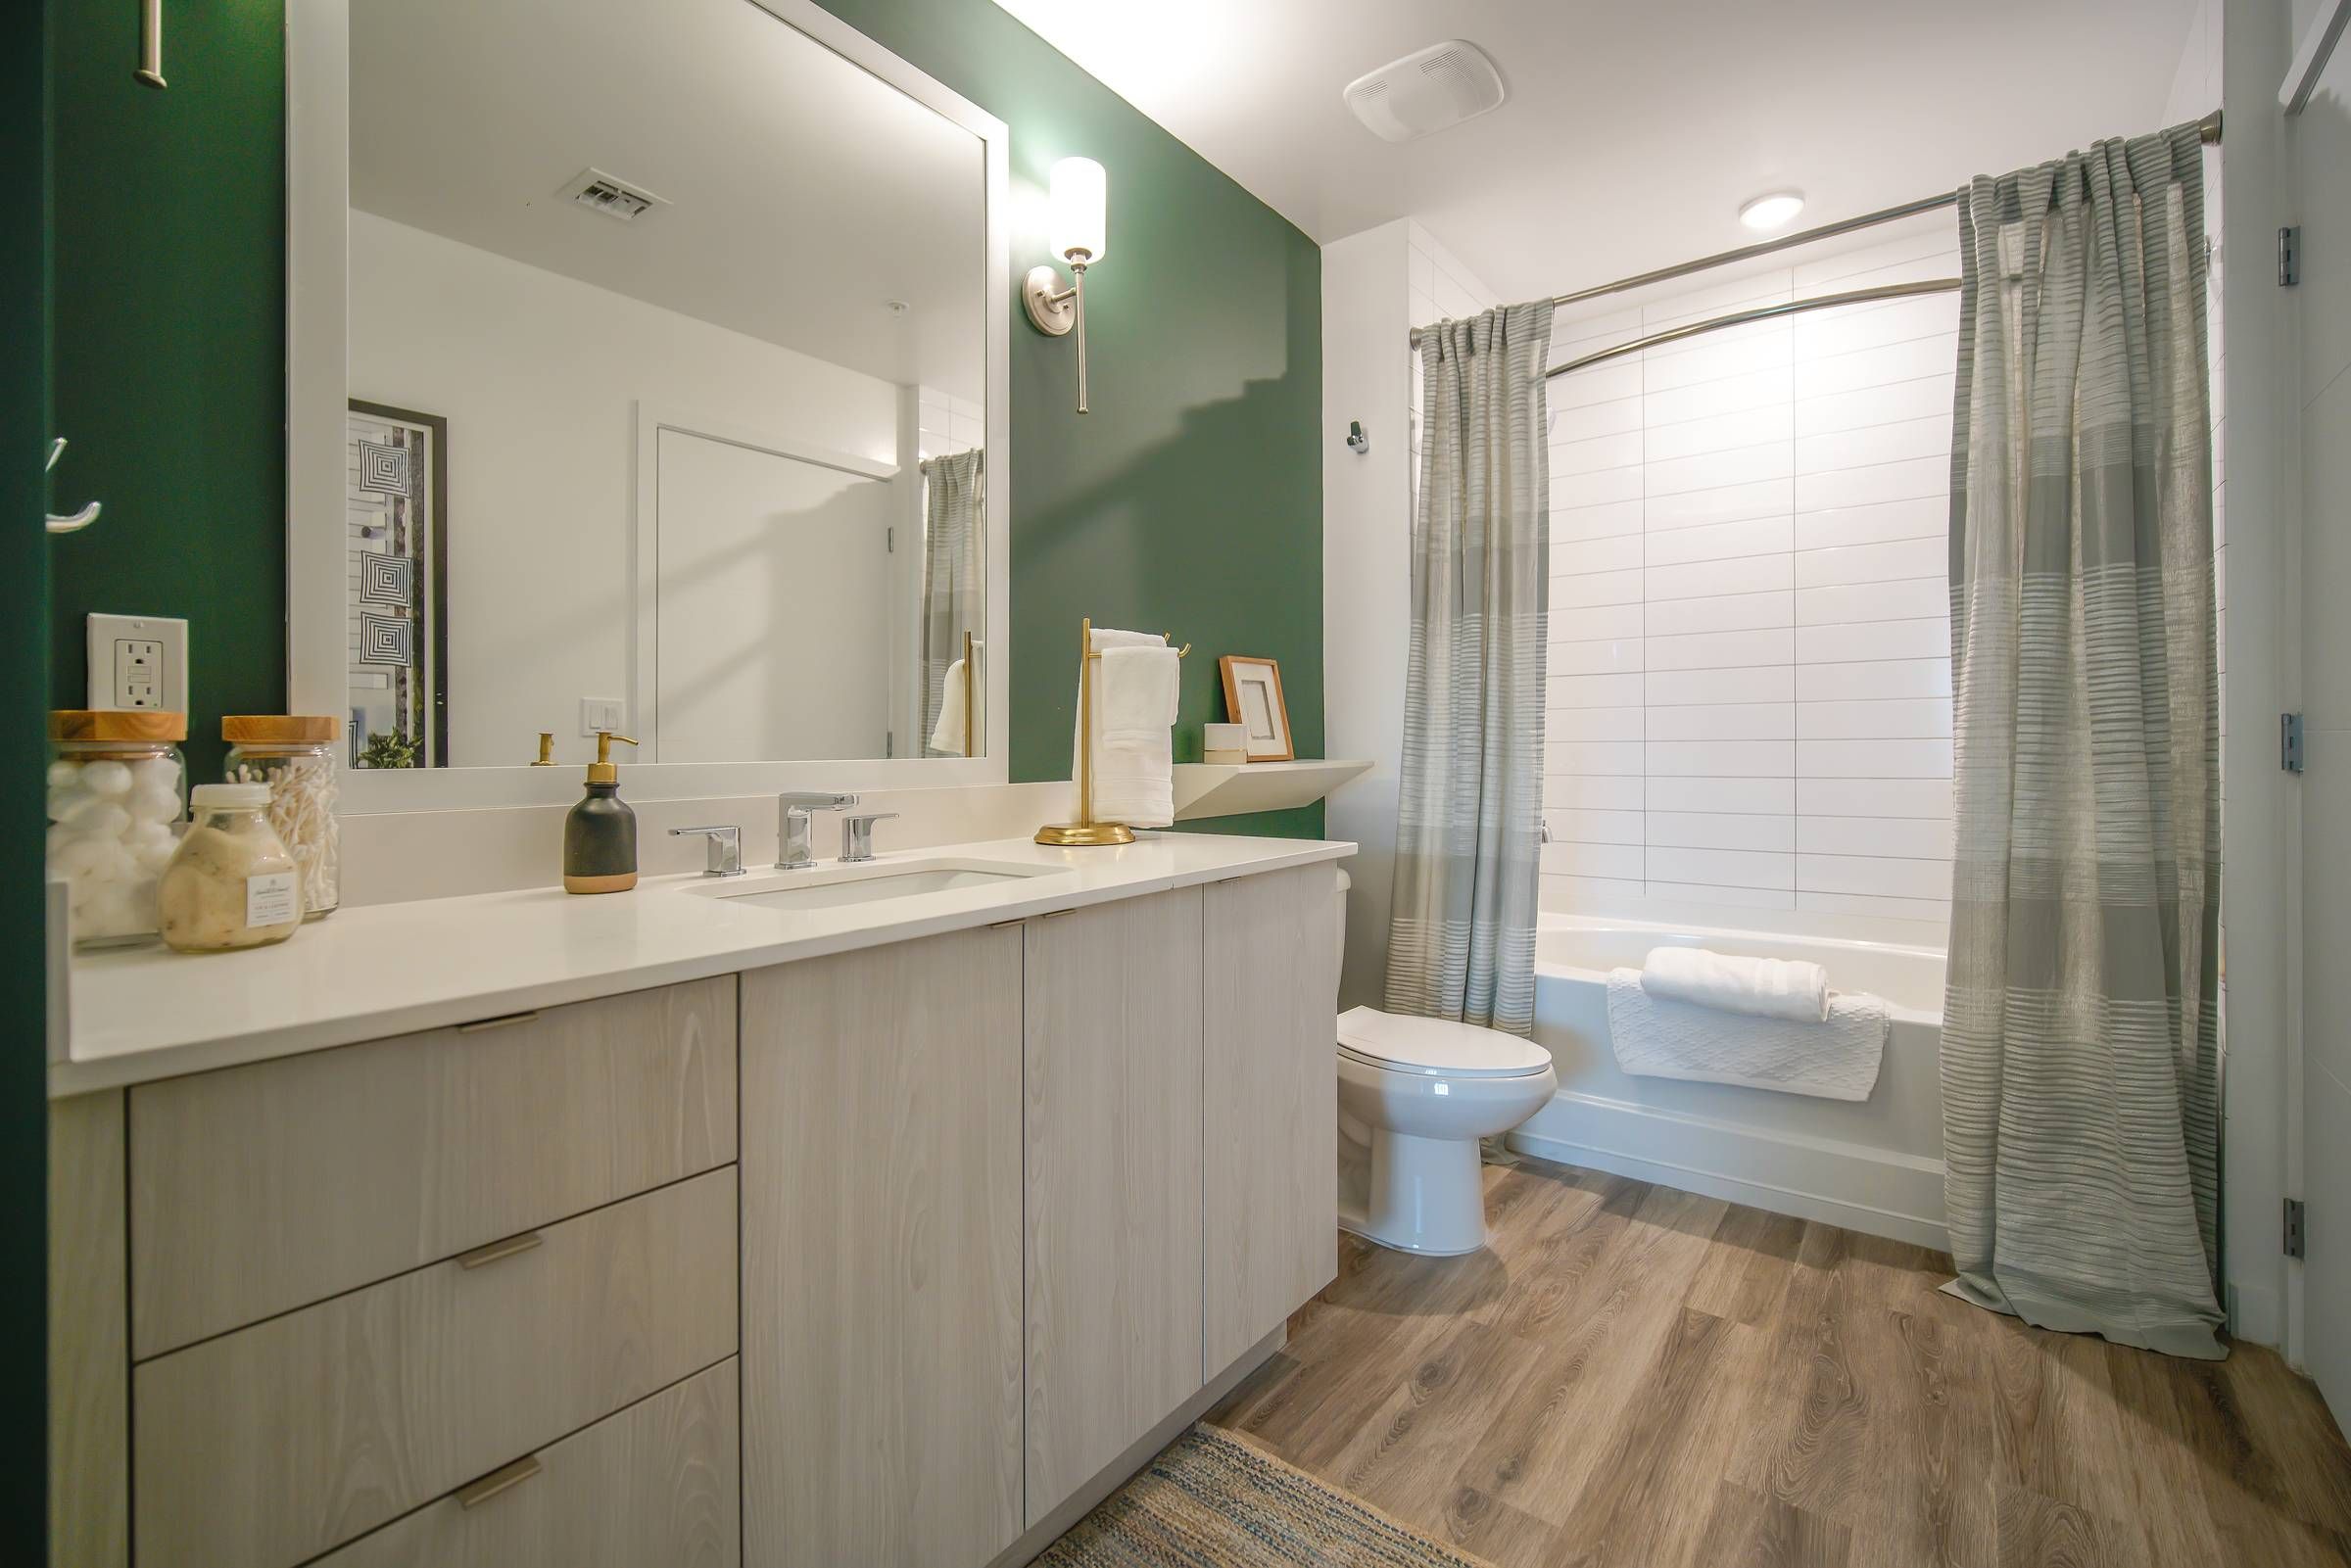 Bask bathroom with toilet, shower/bath, ample cabinet space, and green walls.